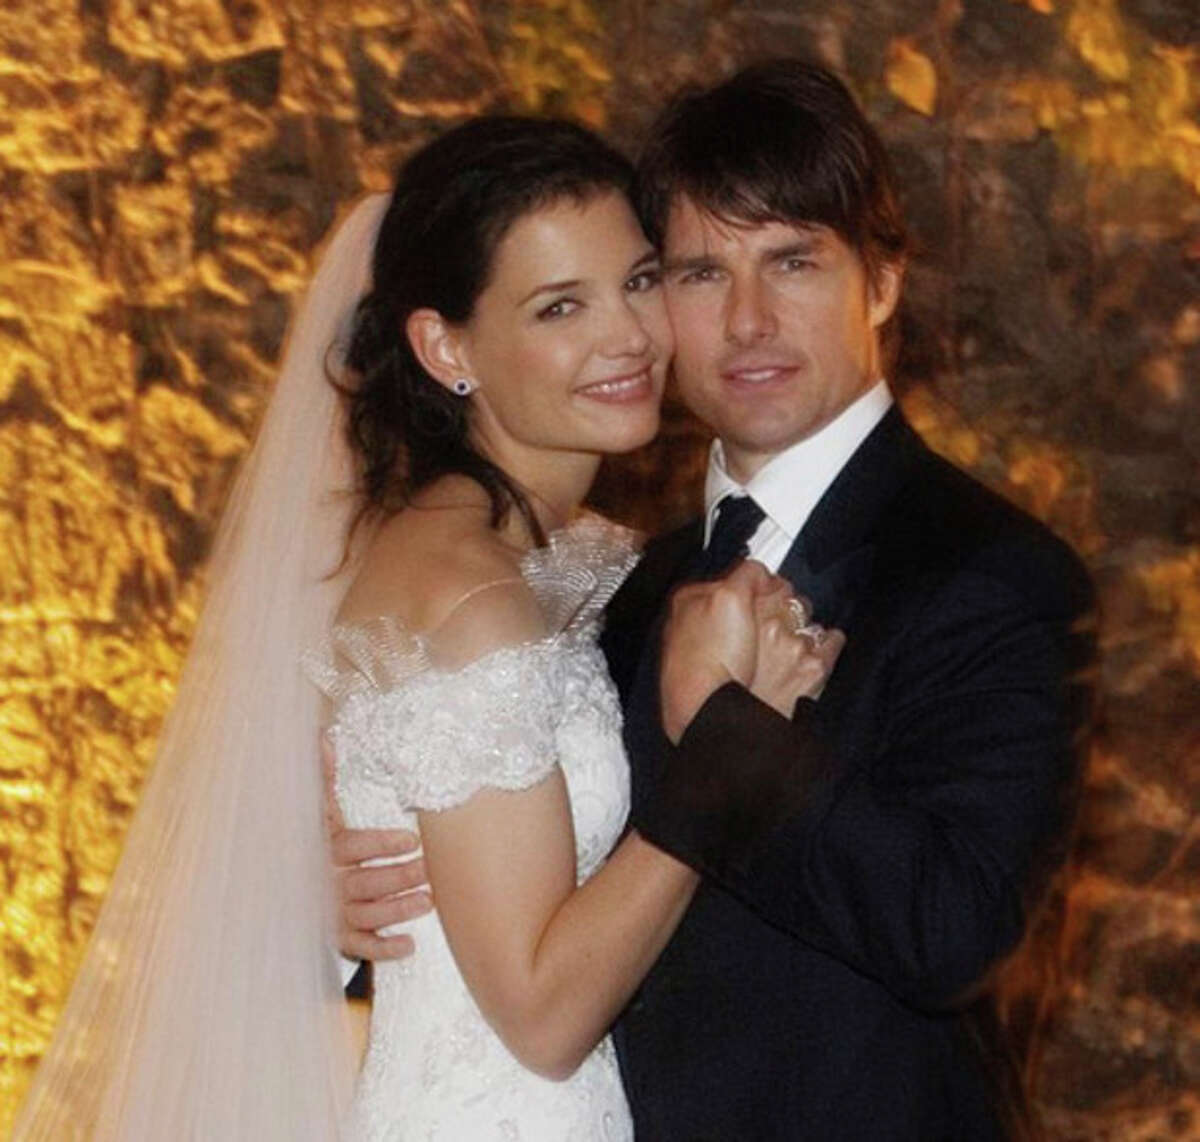 FILE - In this Nov. 18, 2006 file photo released by Rogers and Cowan, actor Tom Cruise and actress Katie Holmes pose in their wedding attire at the 15th-century Odescalchi Castle overlooking Lake Bracciano outside of Rome. Cruise and Homes are calling it quits after five years of marriage. Holmes' attorney Jonathan Wolfe said Friday June 29, 2012 that the couple is divorcing, but called it a private matter for the family. (AP Photo/Robert Evans, File)